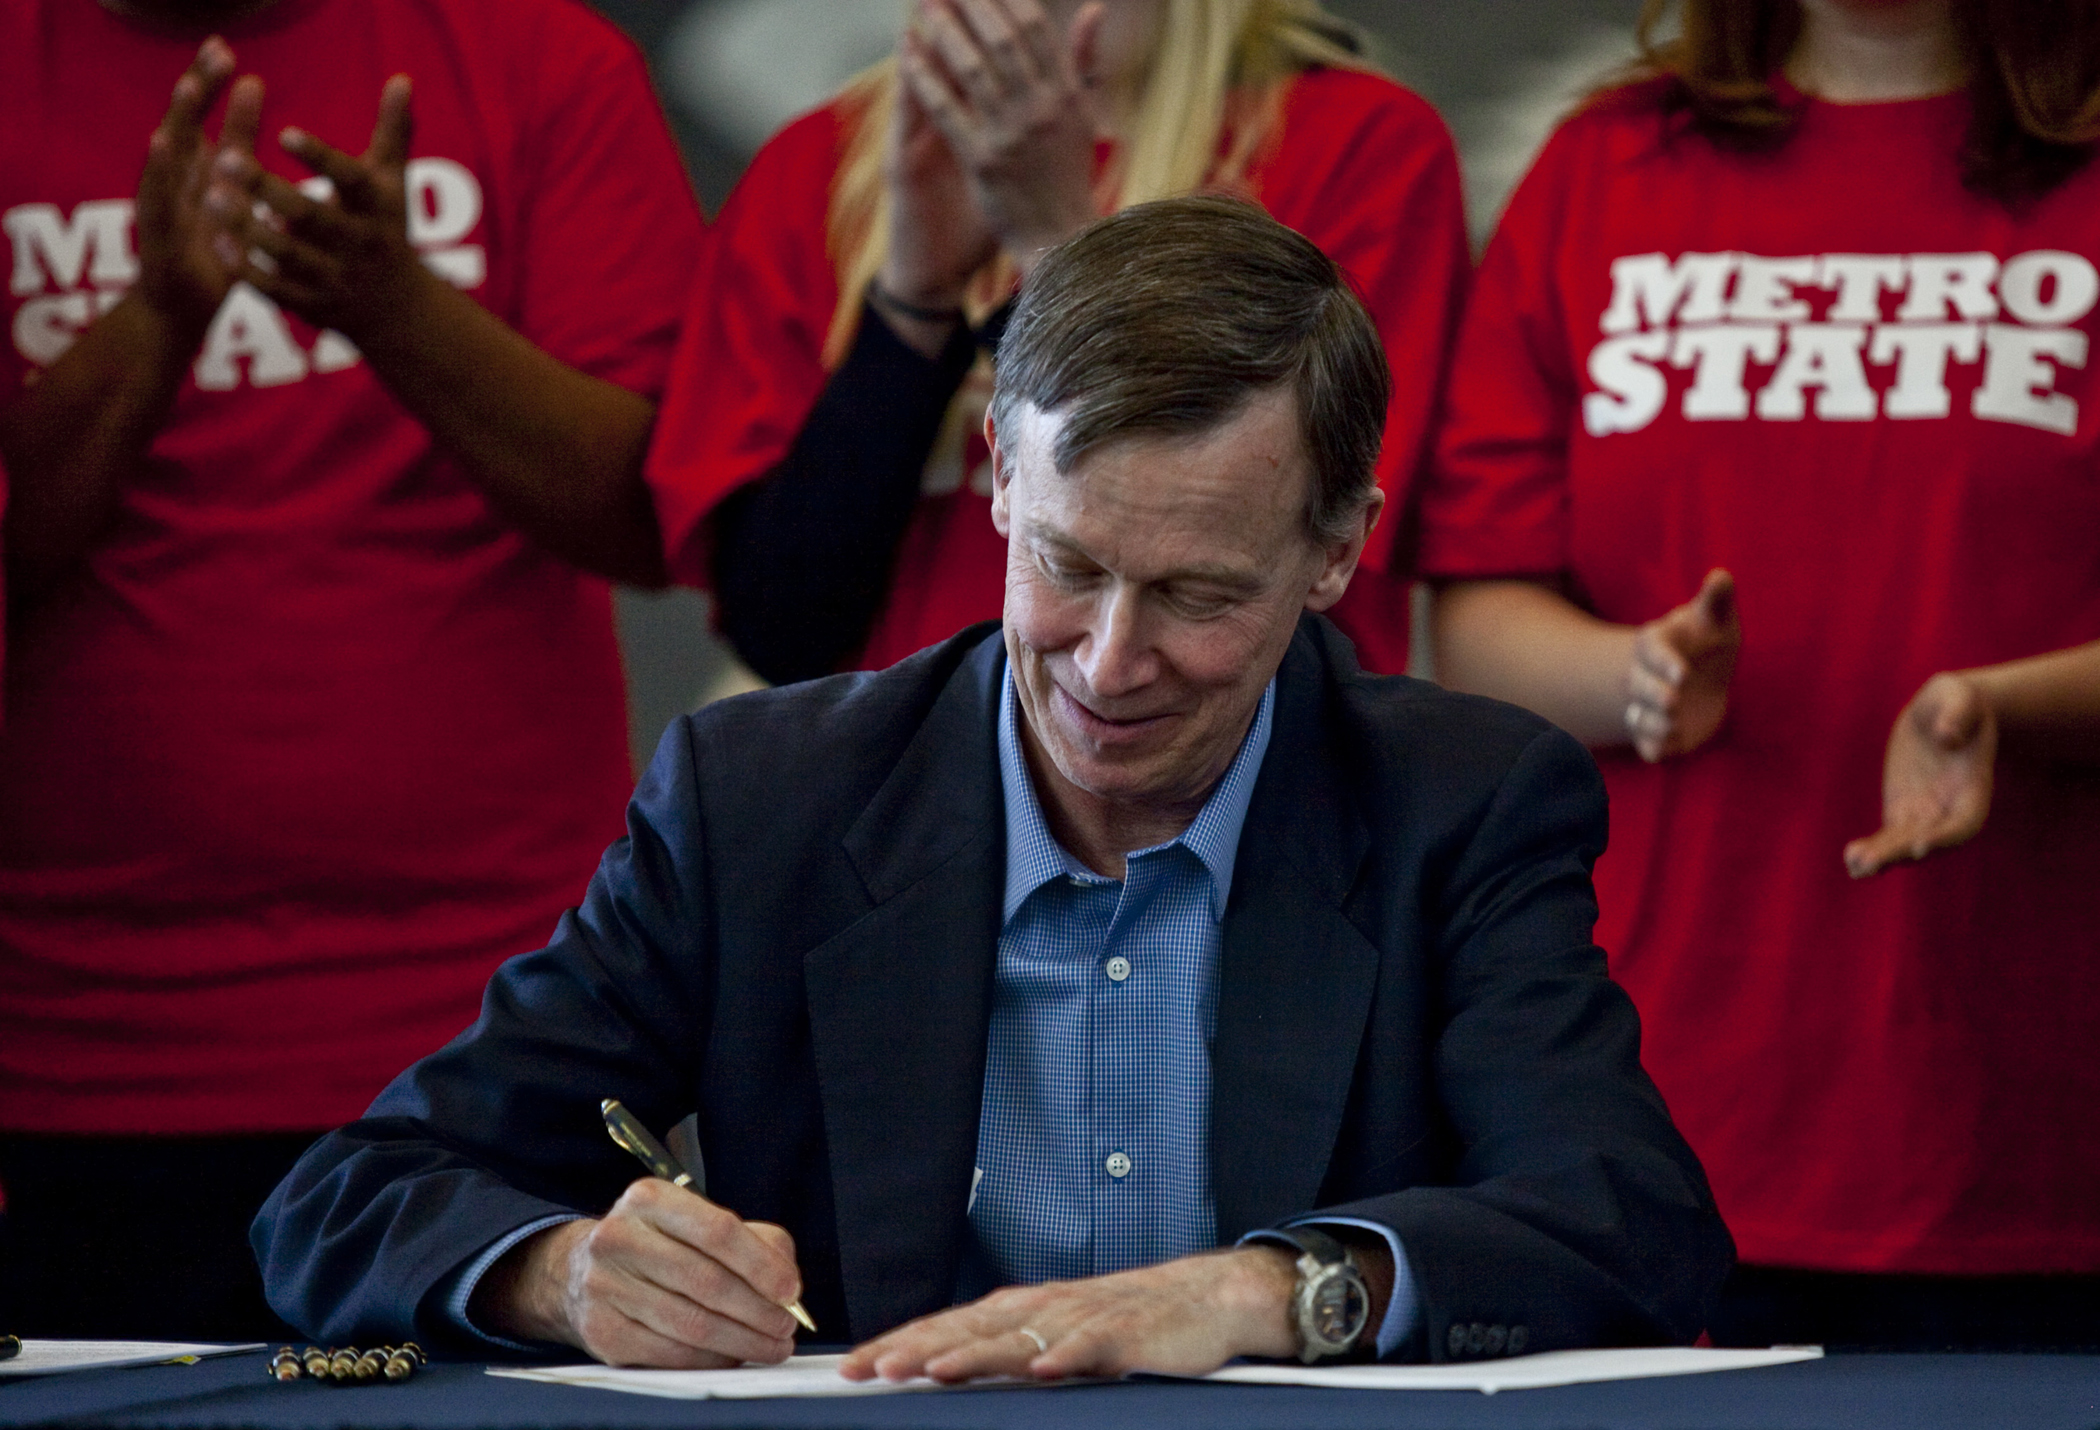 Gov. John Hickenlooper signs bill in Lobby of Student Success Building, Dr. Jordan, University President, VIPs, Rowdy and students watch event.